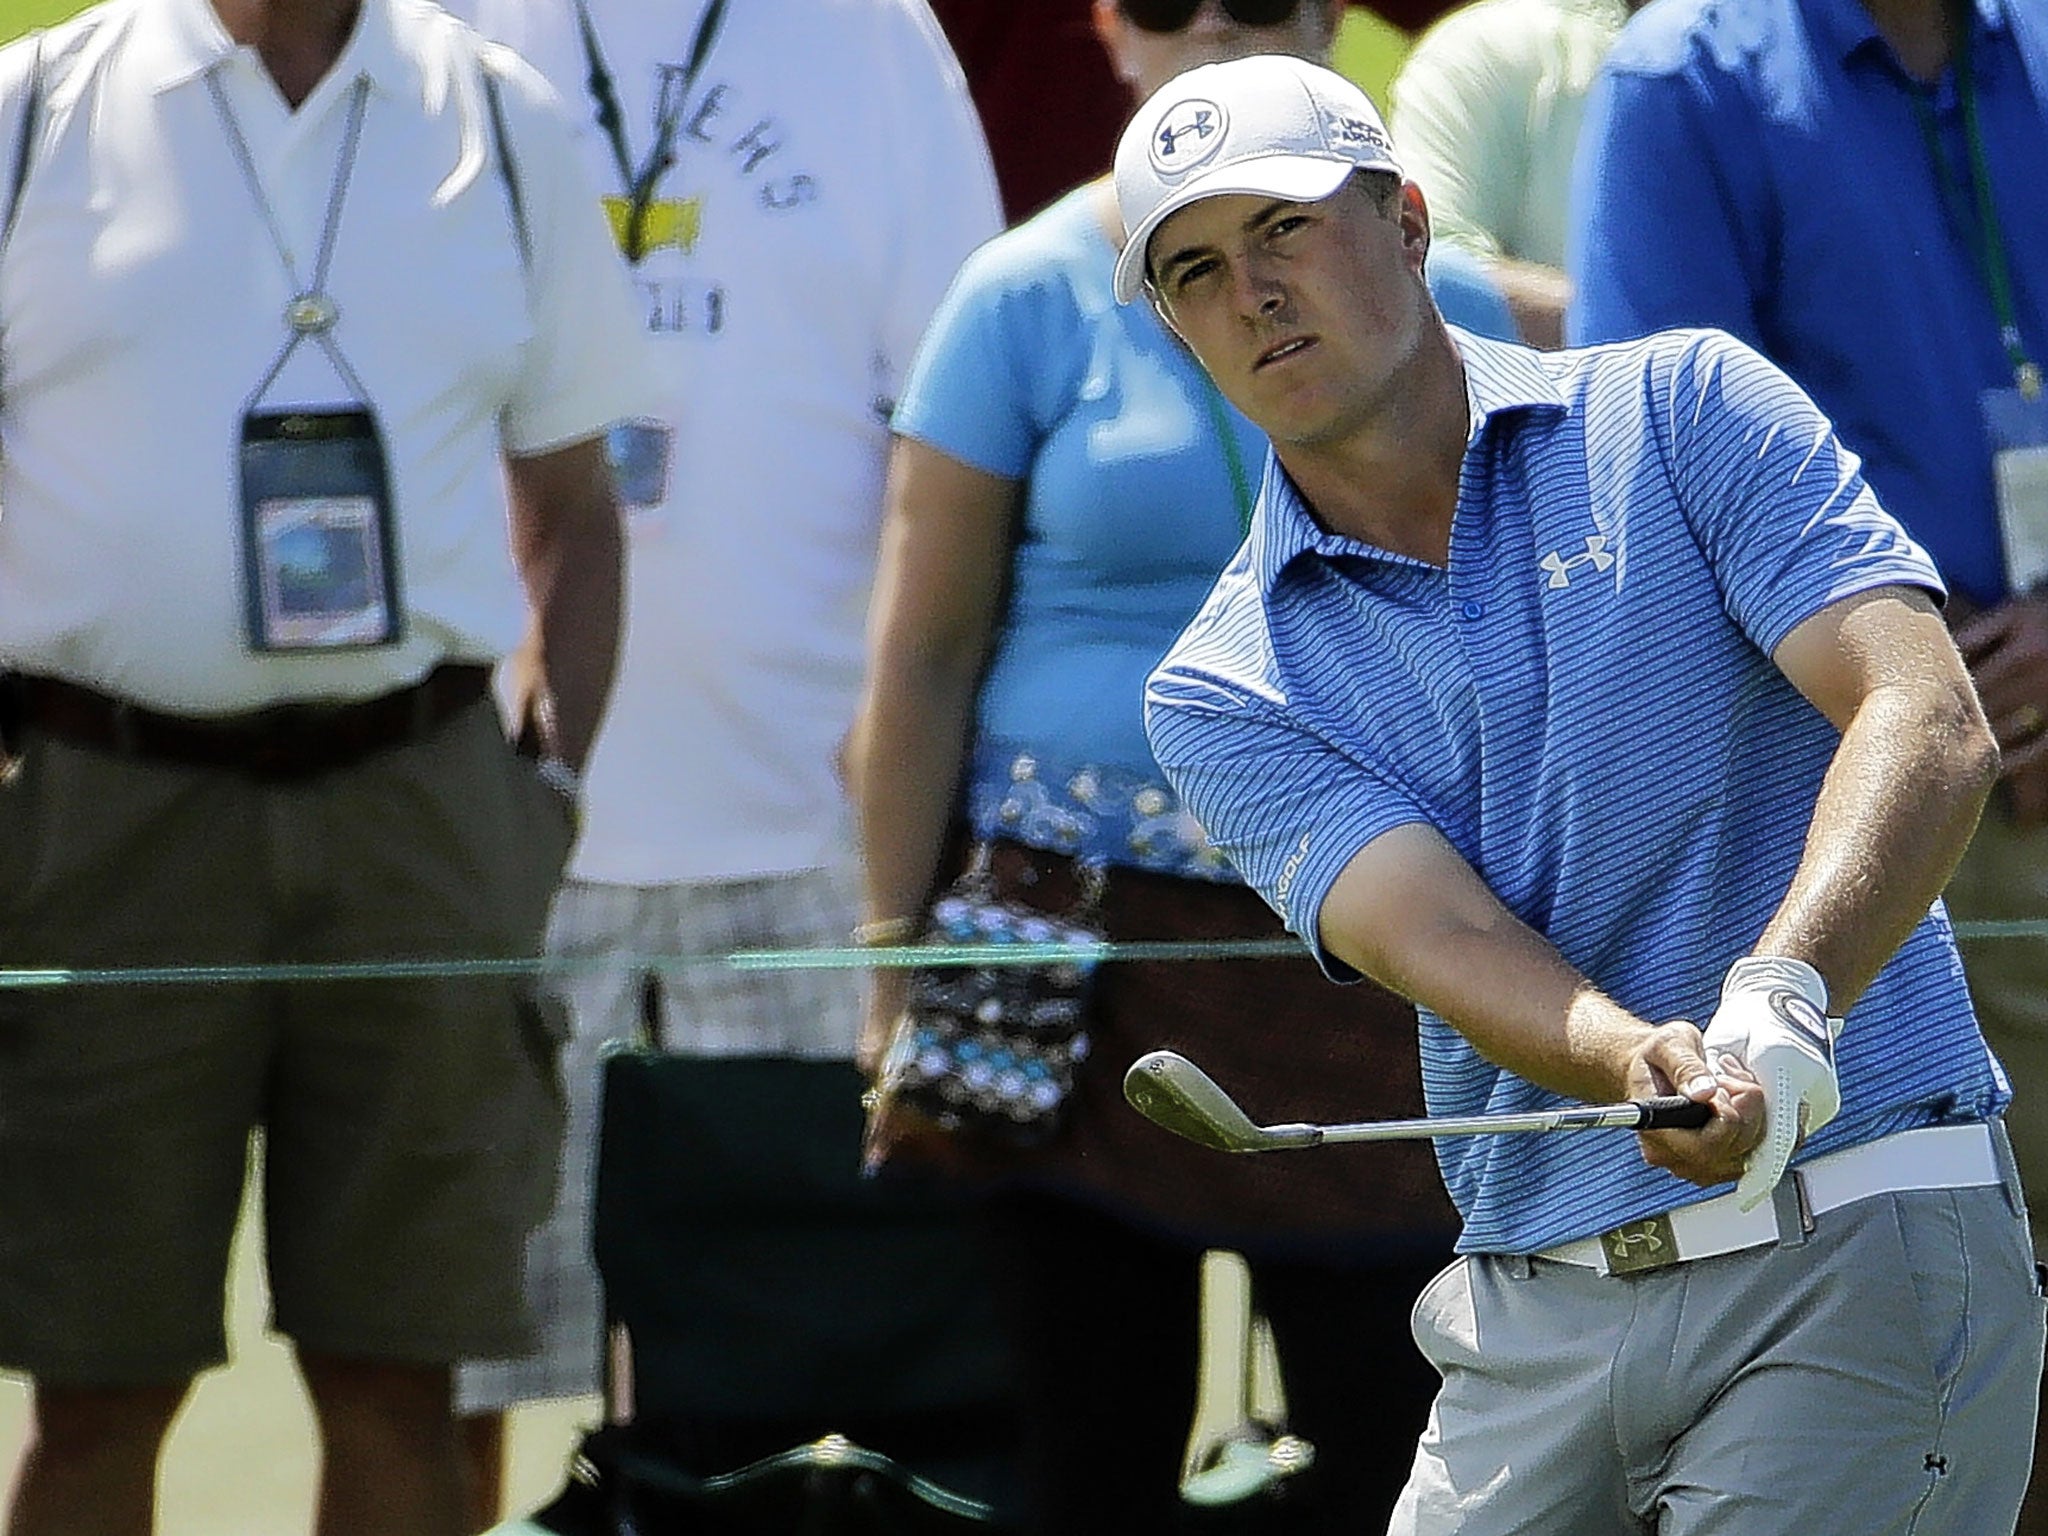 Jordan Spieth chips to the second green during the third round at Augusta yesterday